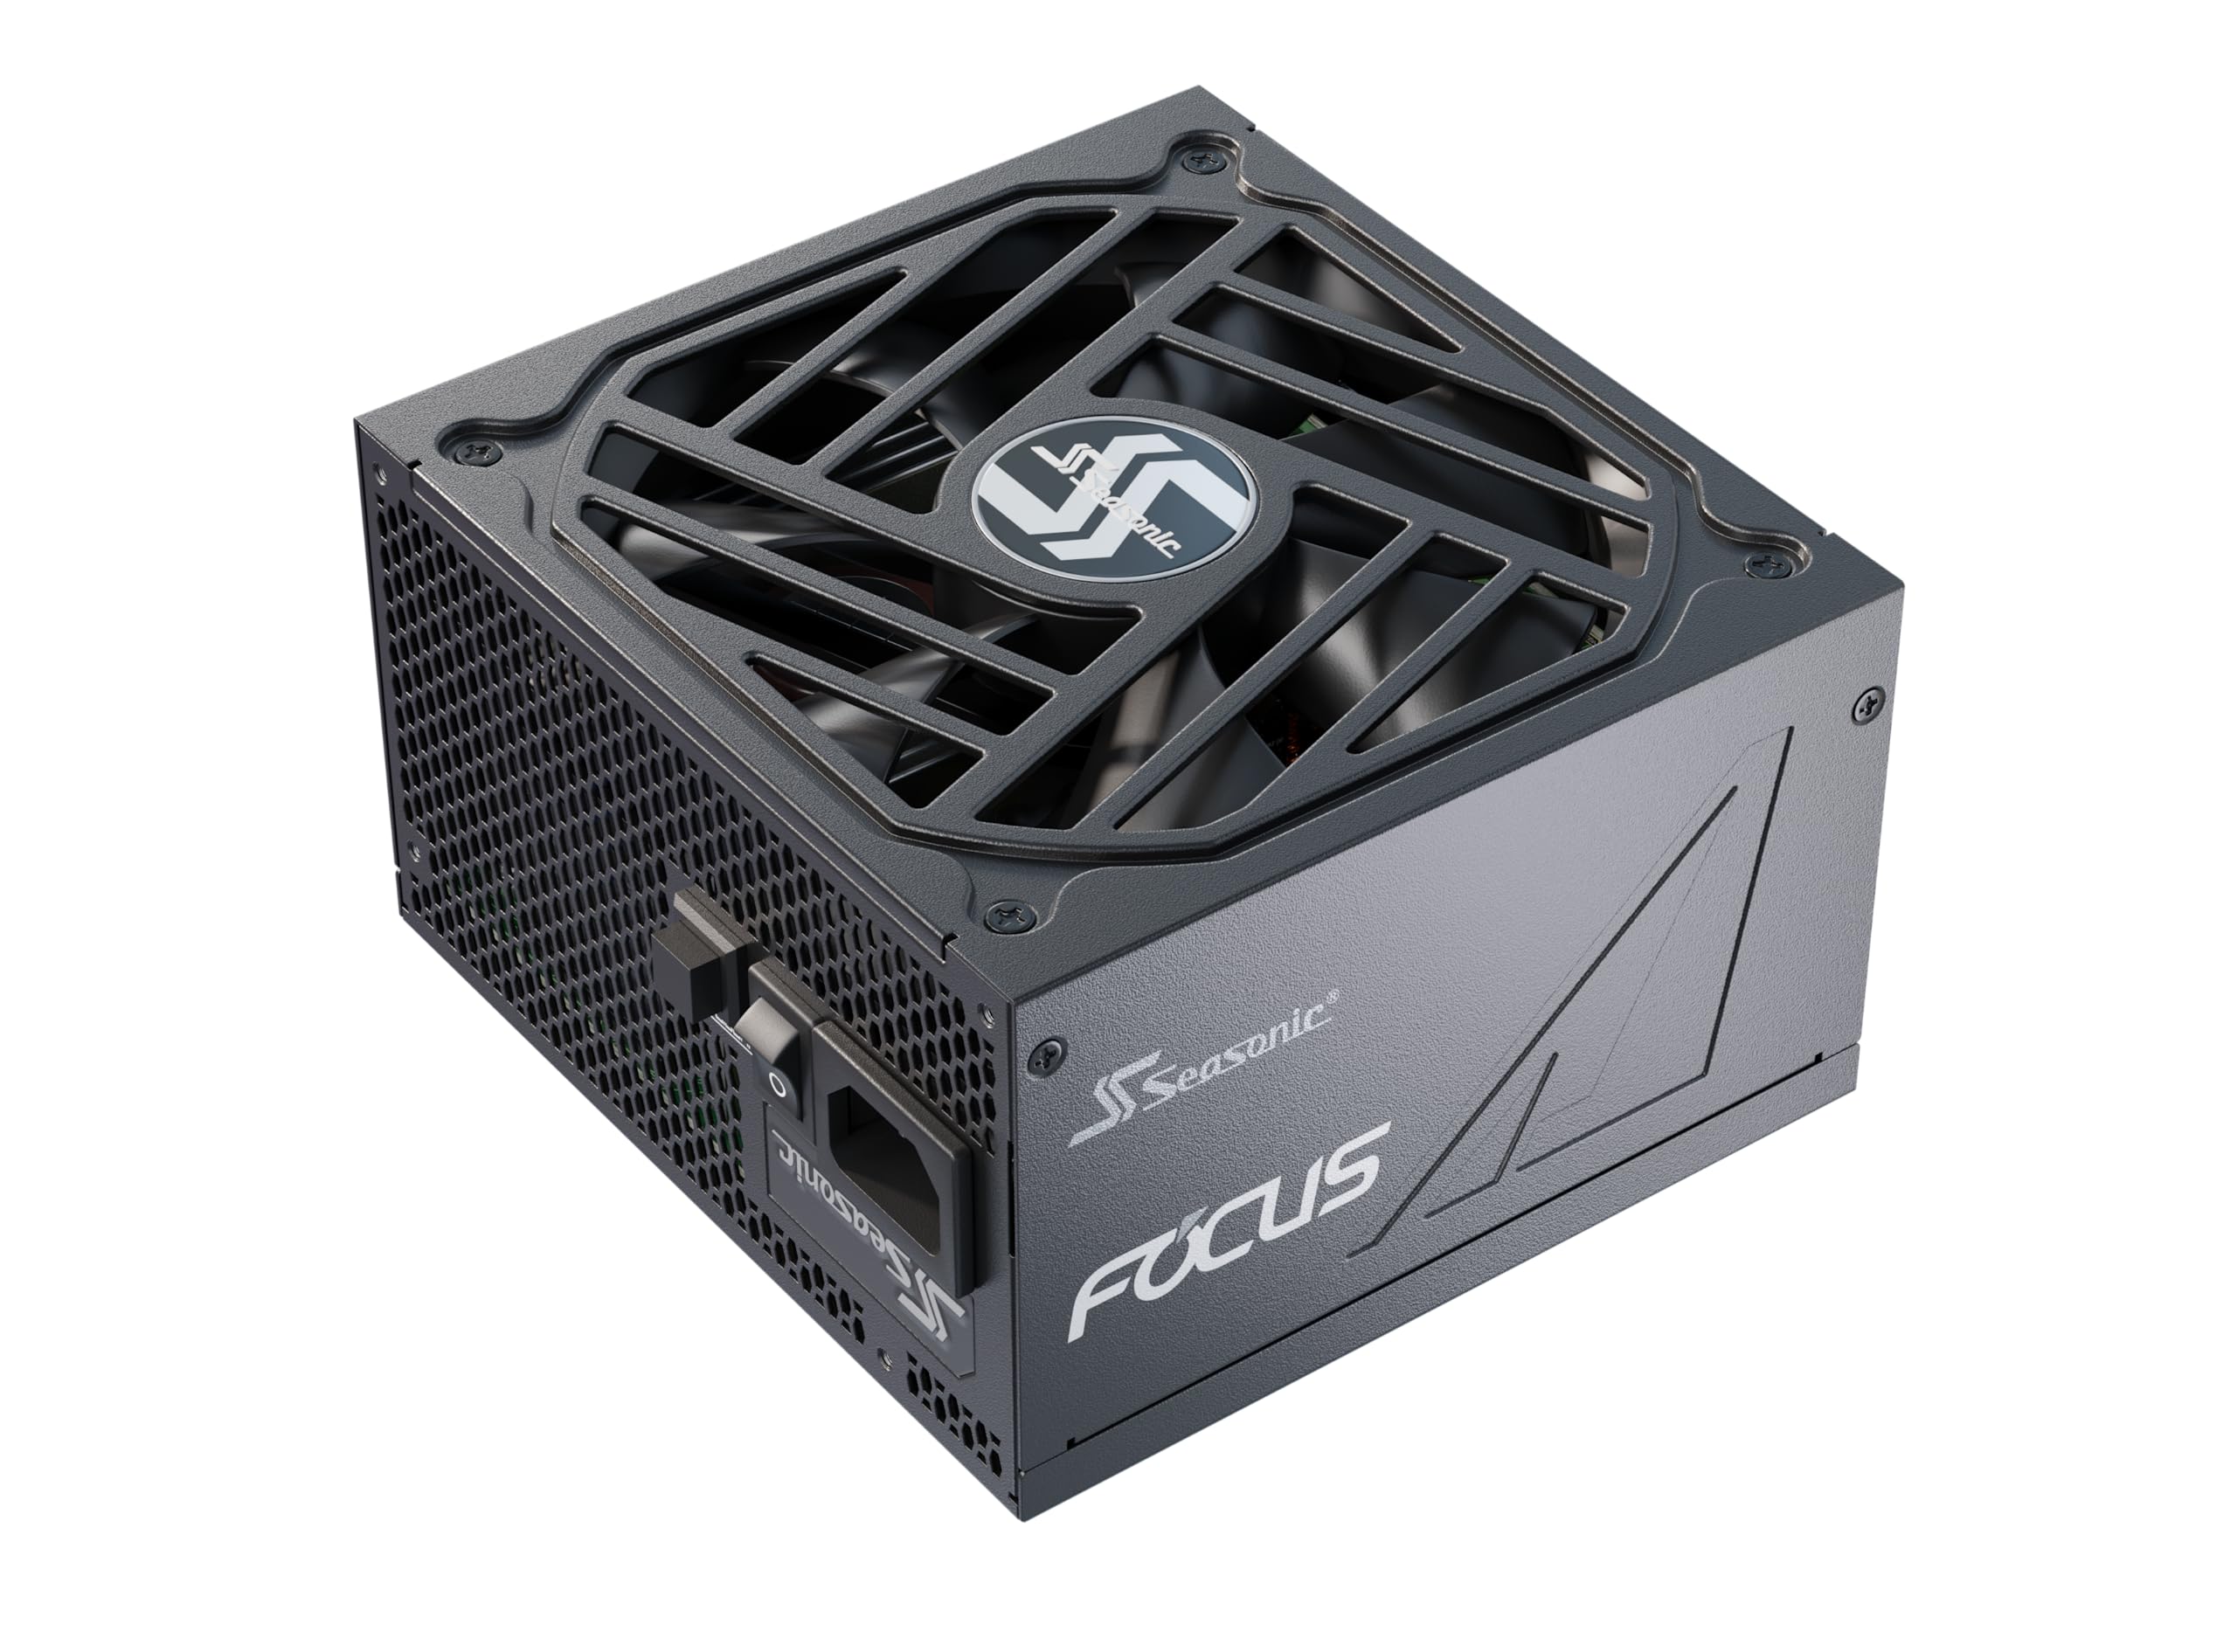 Seasonic Focus V3 GX-850, 850W 80+ Gold, Full-Modular, Fan Control in Fanless, Silent, and Cooling Mode, 10 Year Warranty, Perfect Power Supply for Gaming and Various Application, SSR-850FX3.